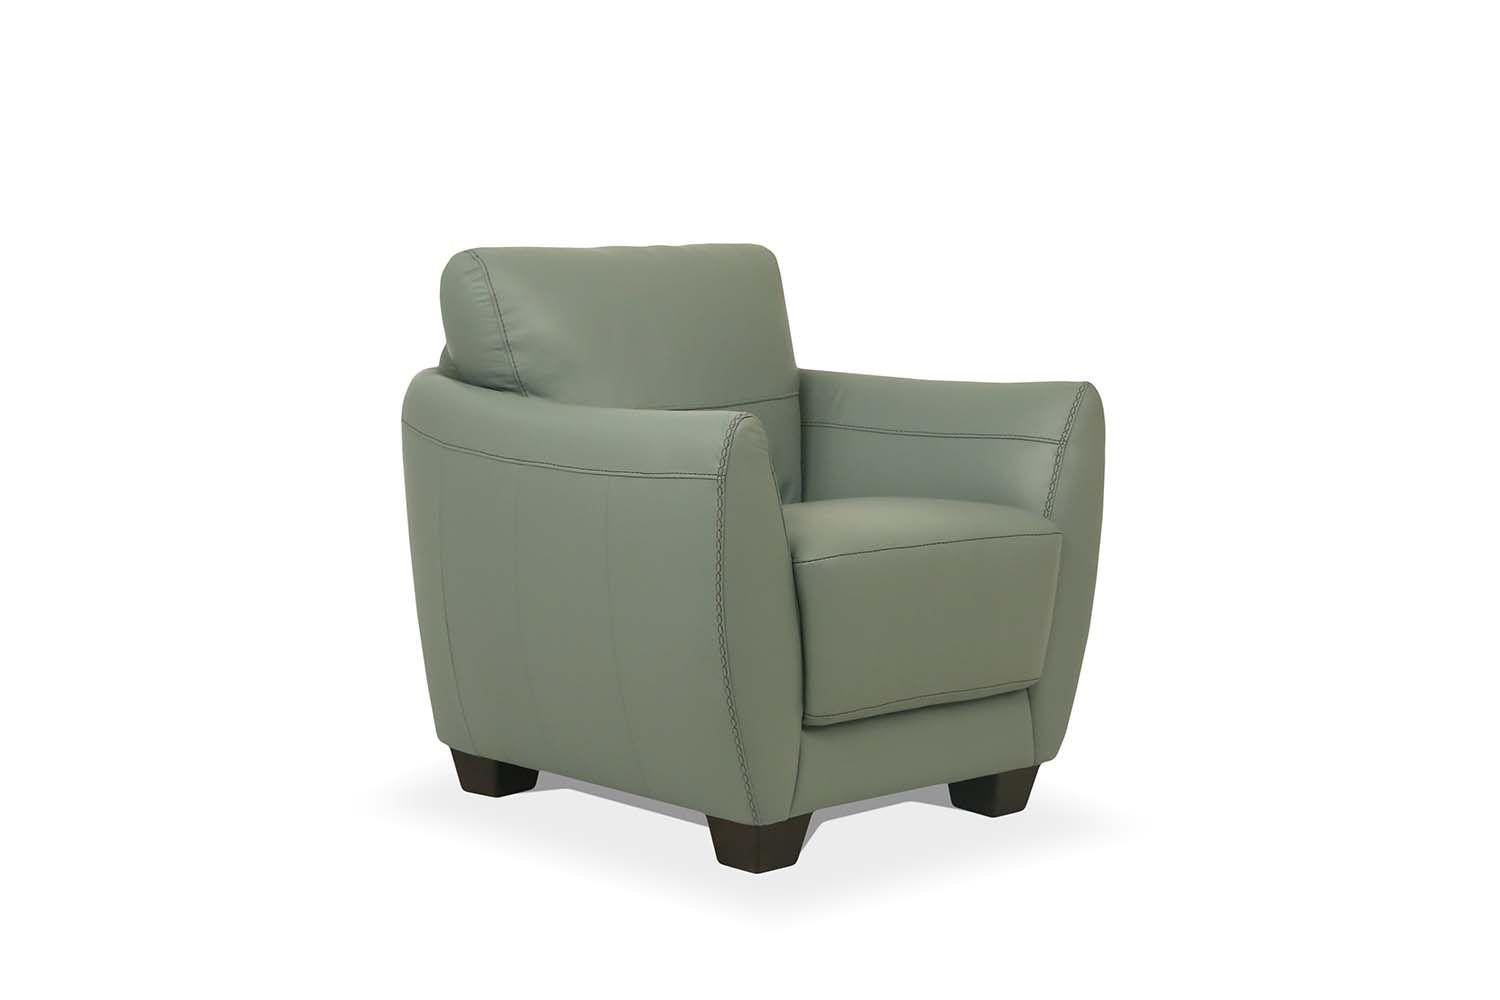 Modern, Transitional Chair Valeria 54952 in Spring green Leather